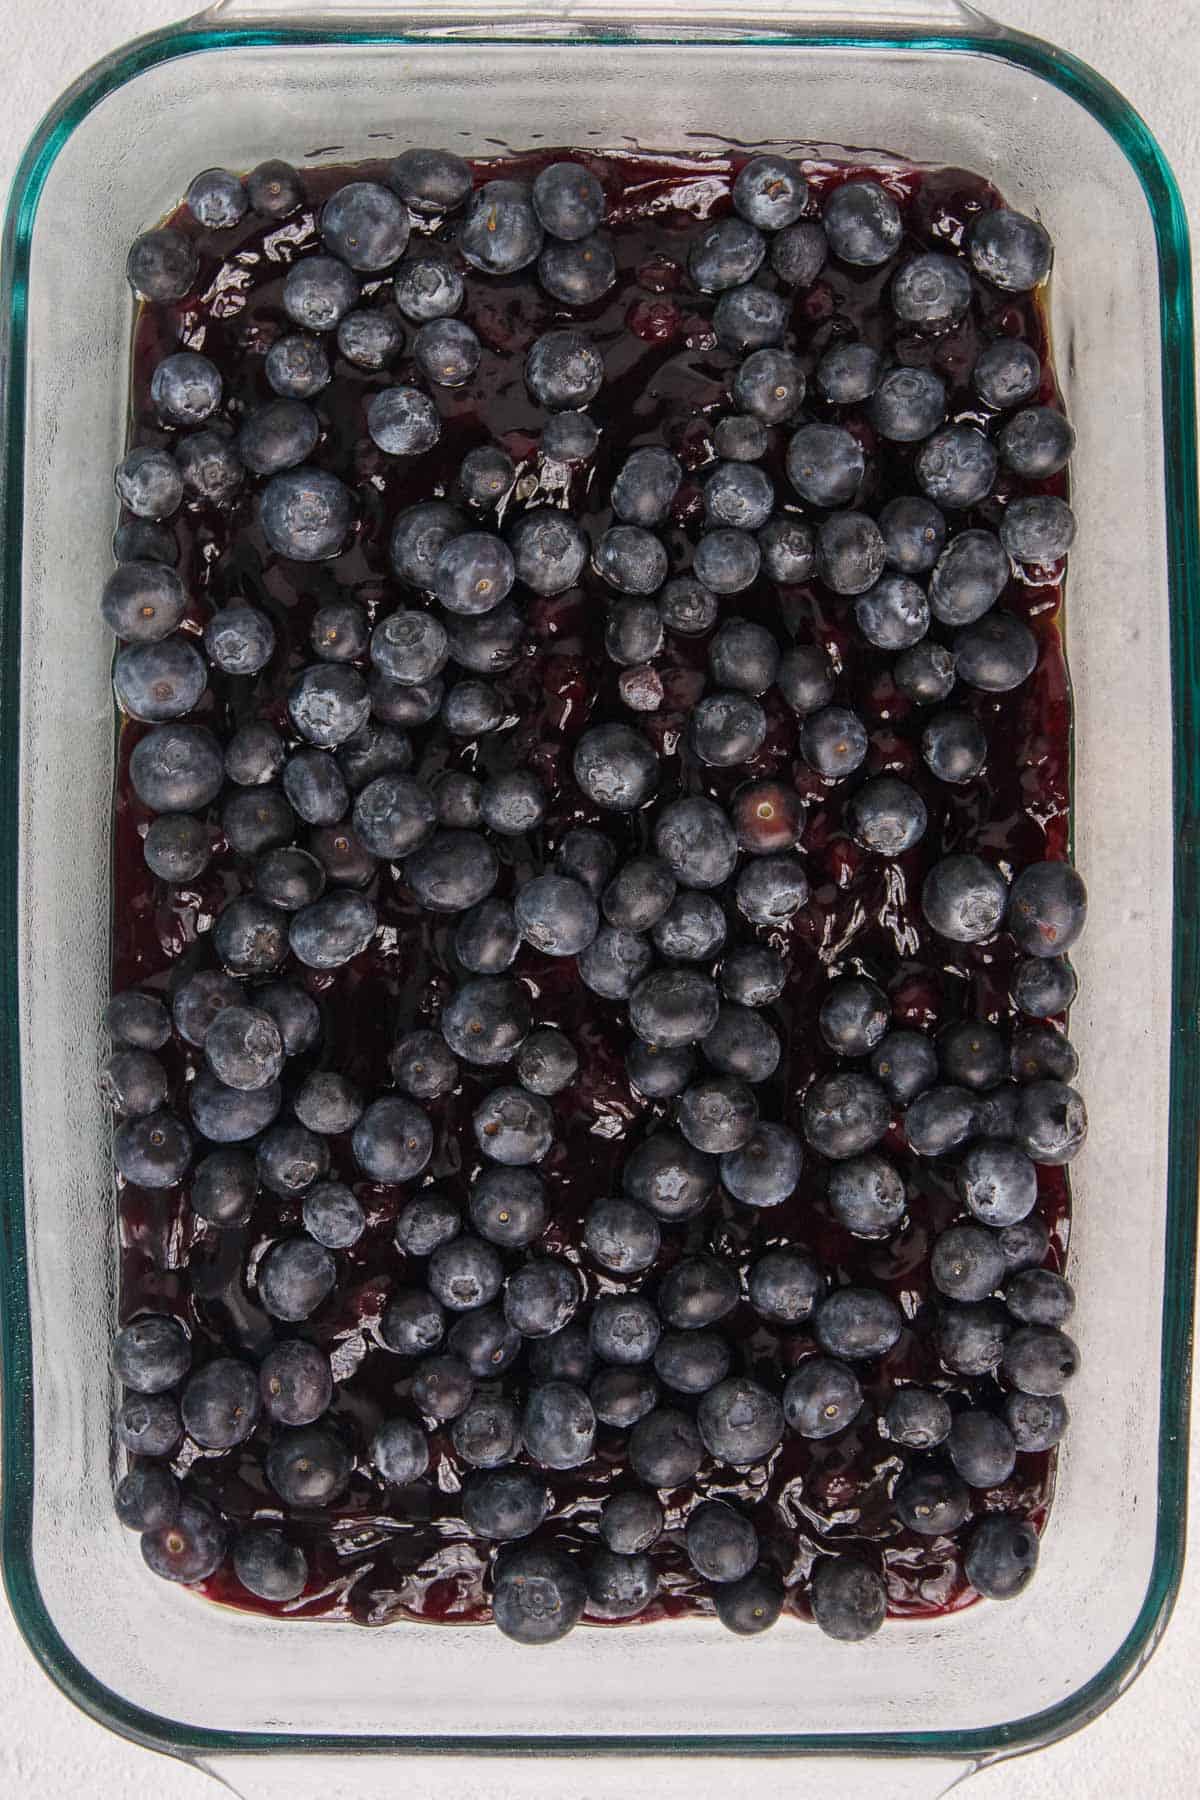 Fresh blueberries spread evenly over pie filling